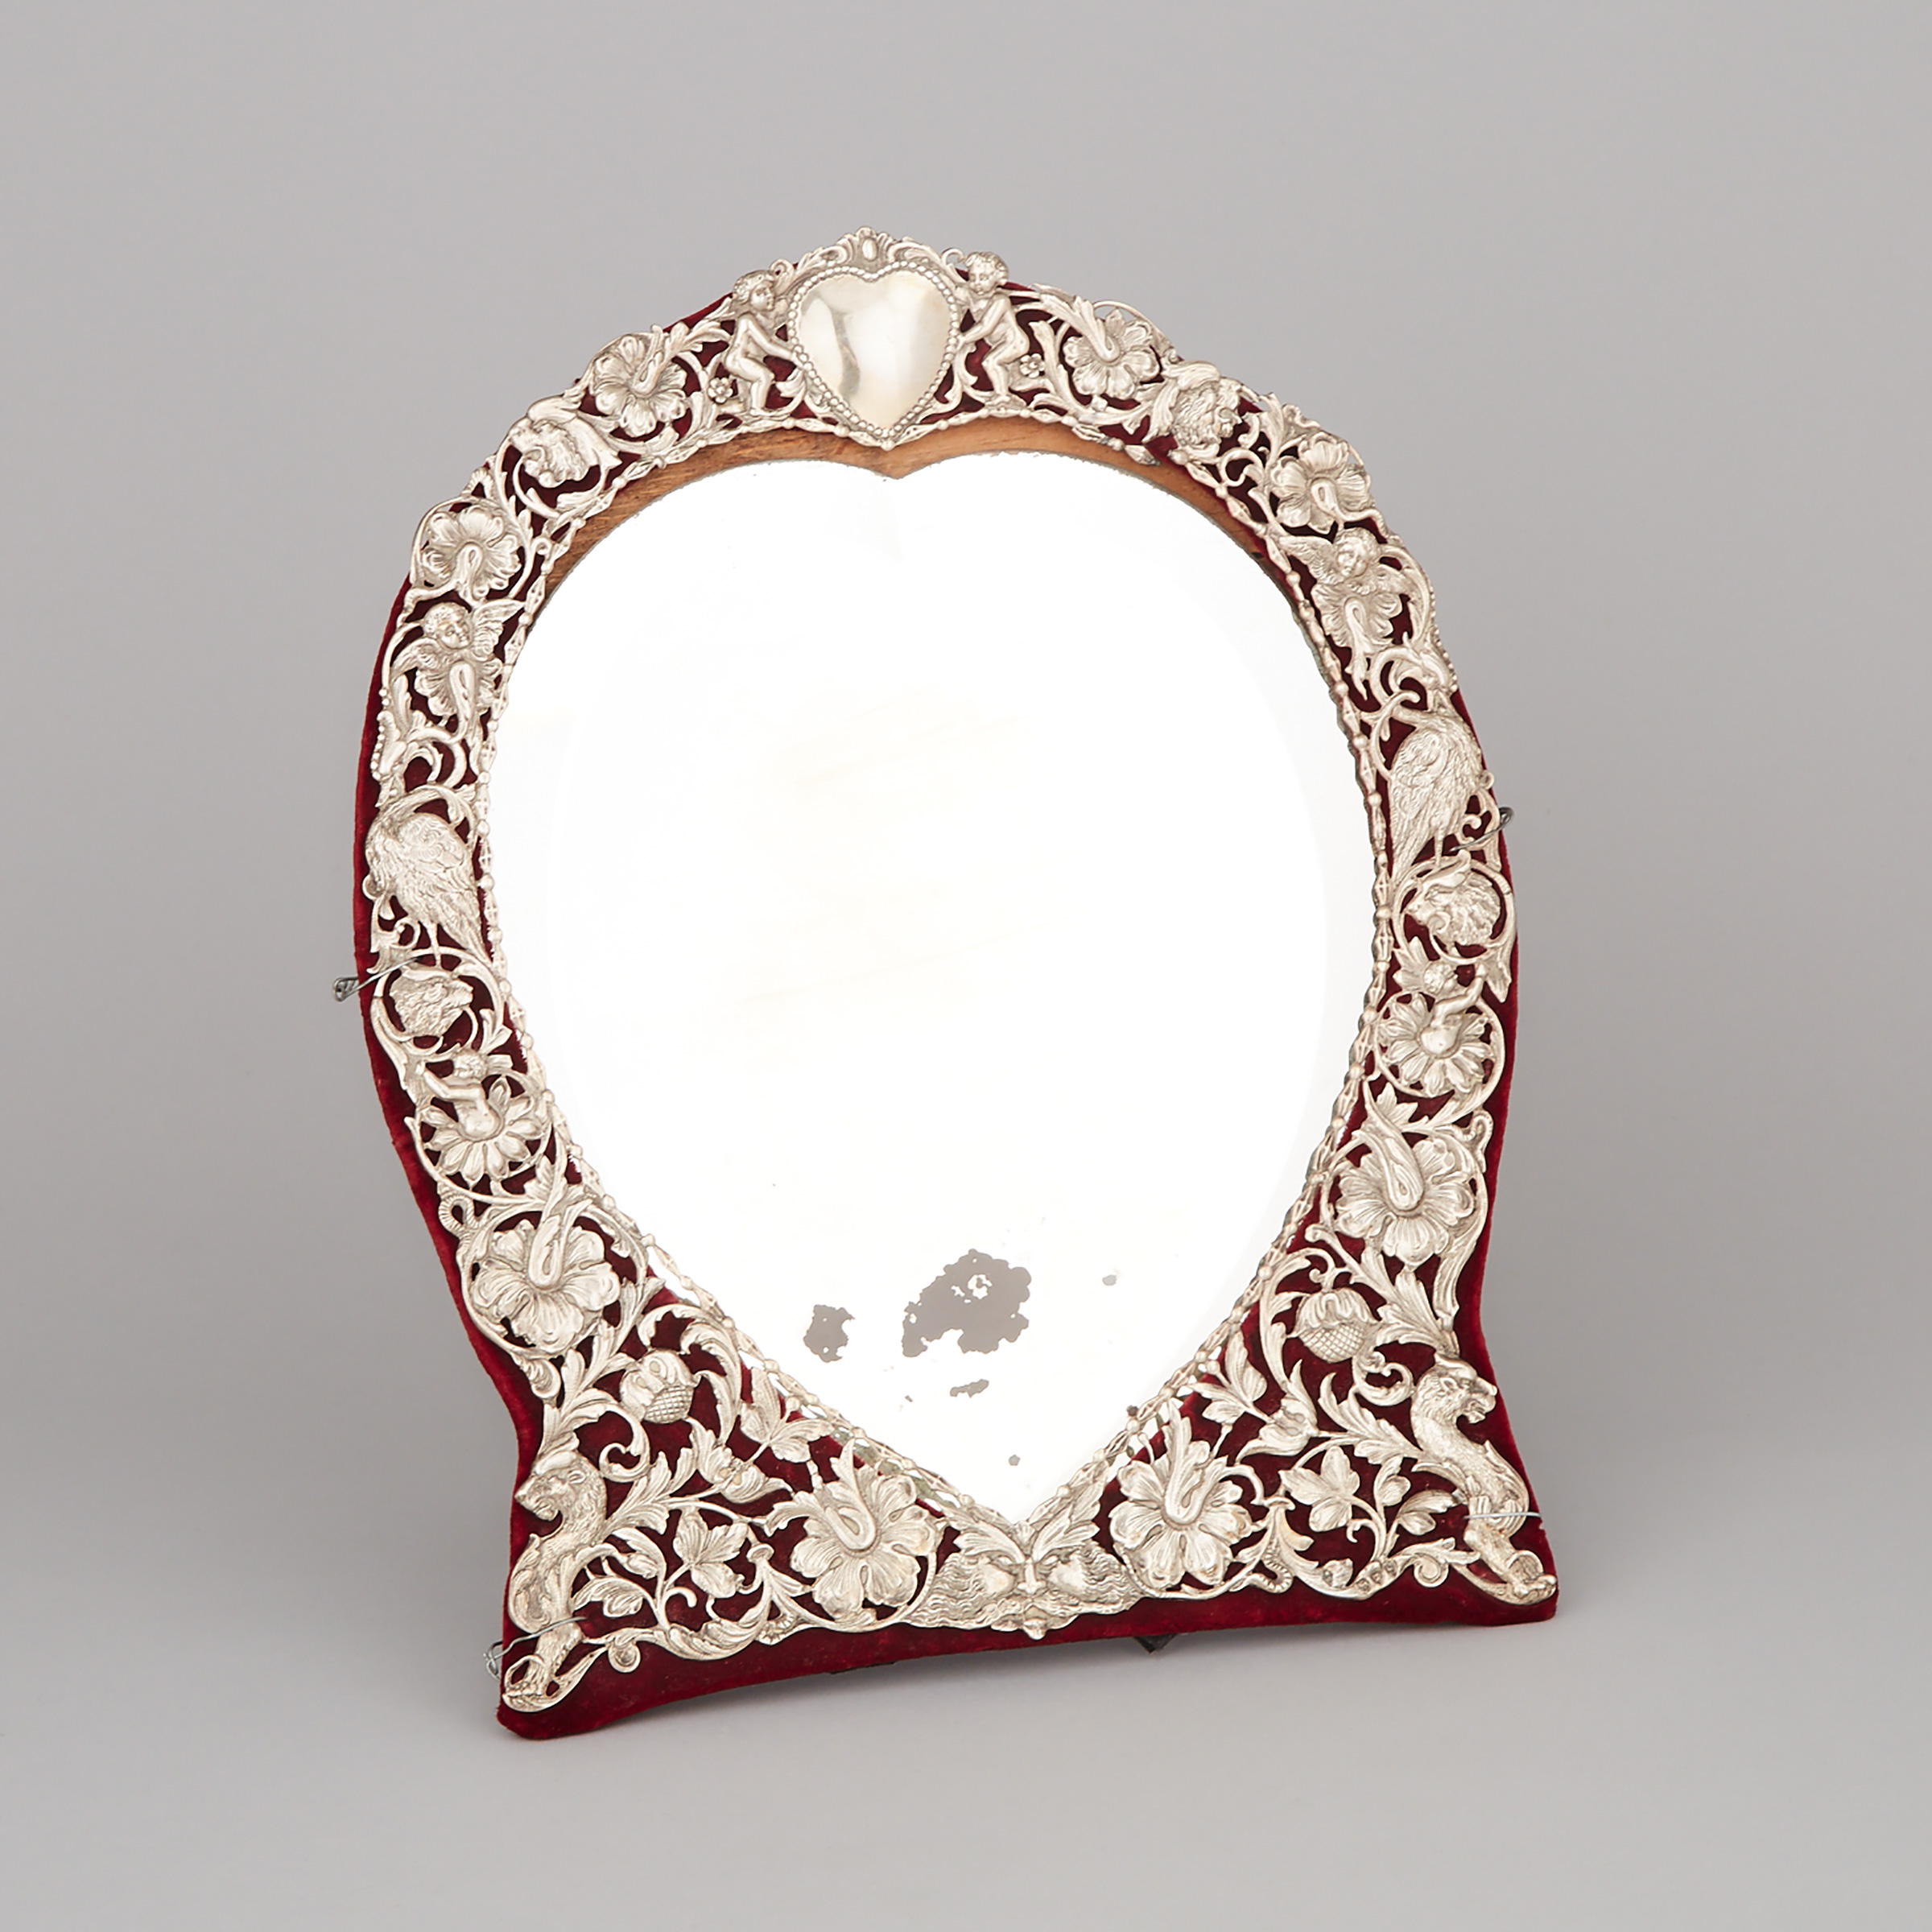 Late Victorian Silver Framed Heart-Shaped Strut Mirror, William Comyns, London, 1893